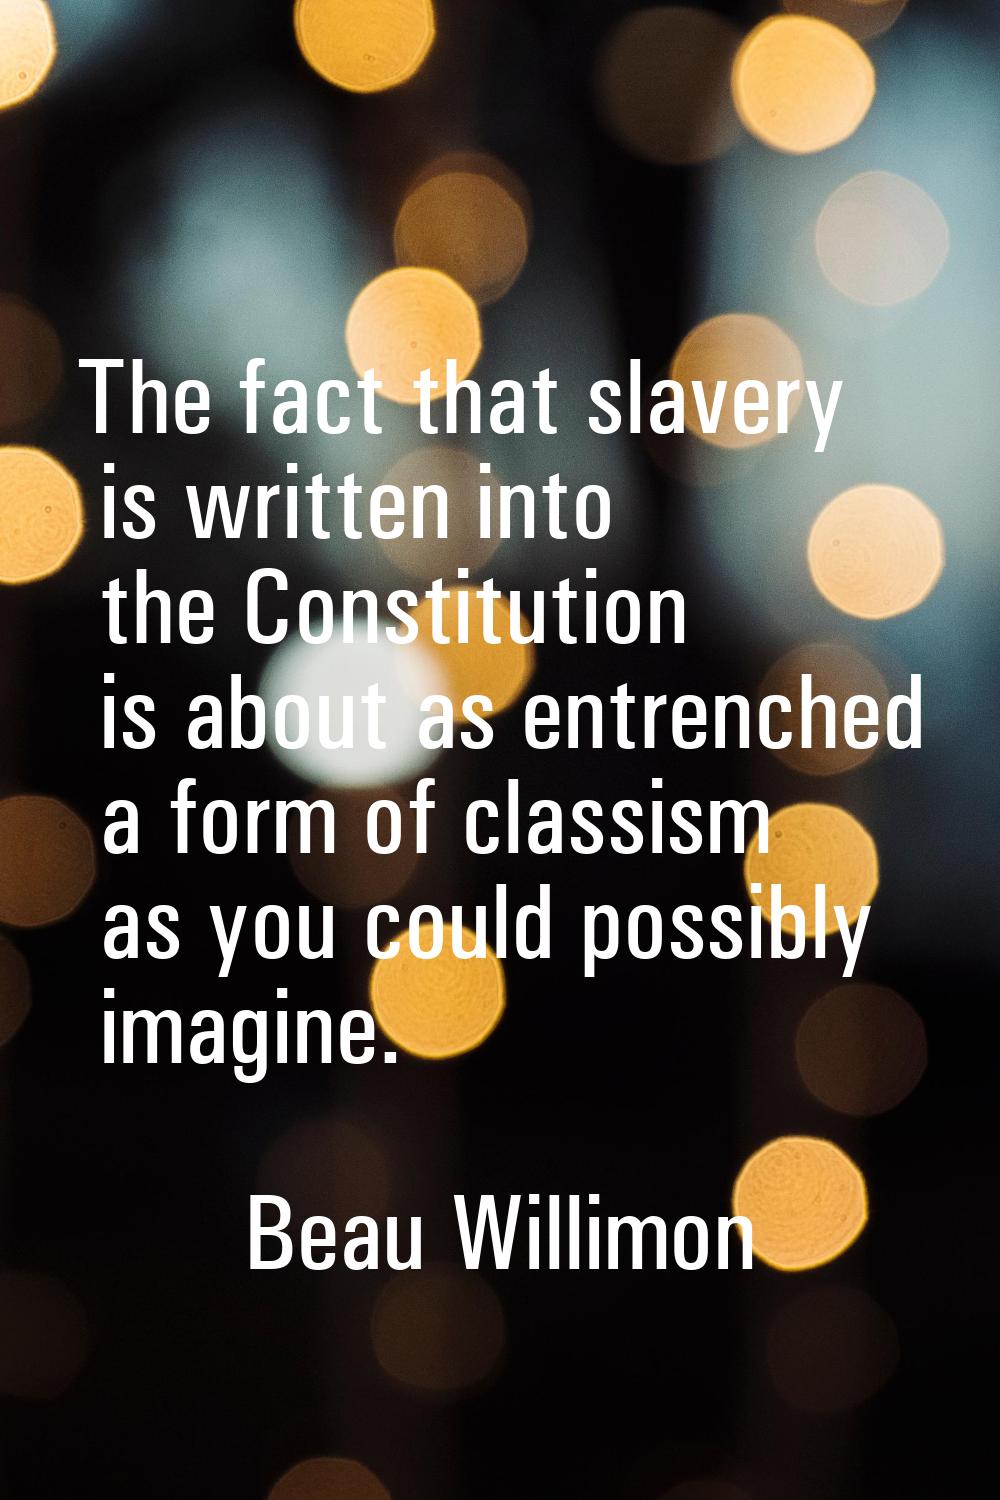 The fact that slavery is written into the Constitution is about as entrenched a form of classism as